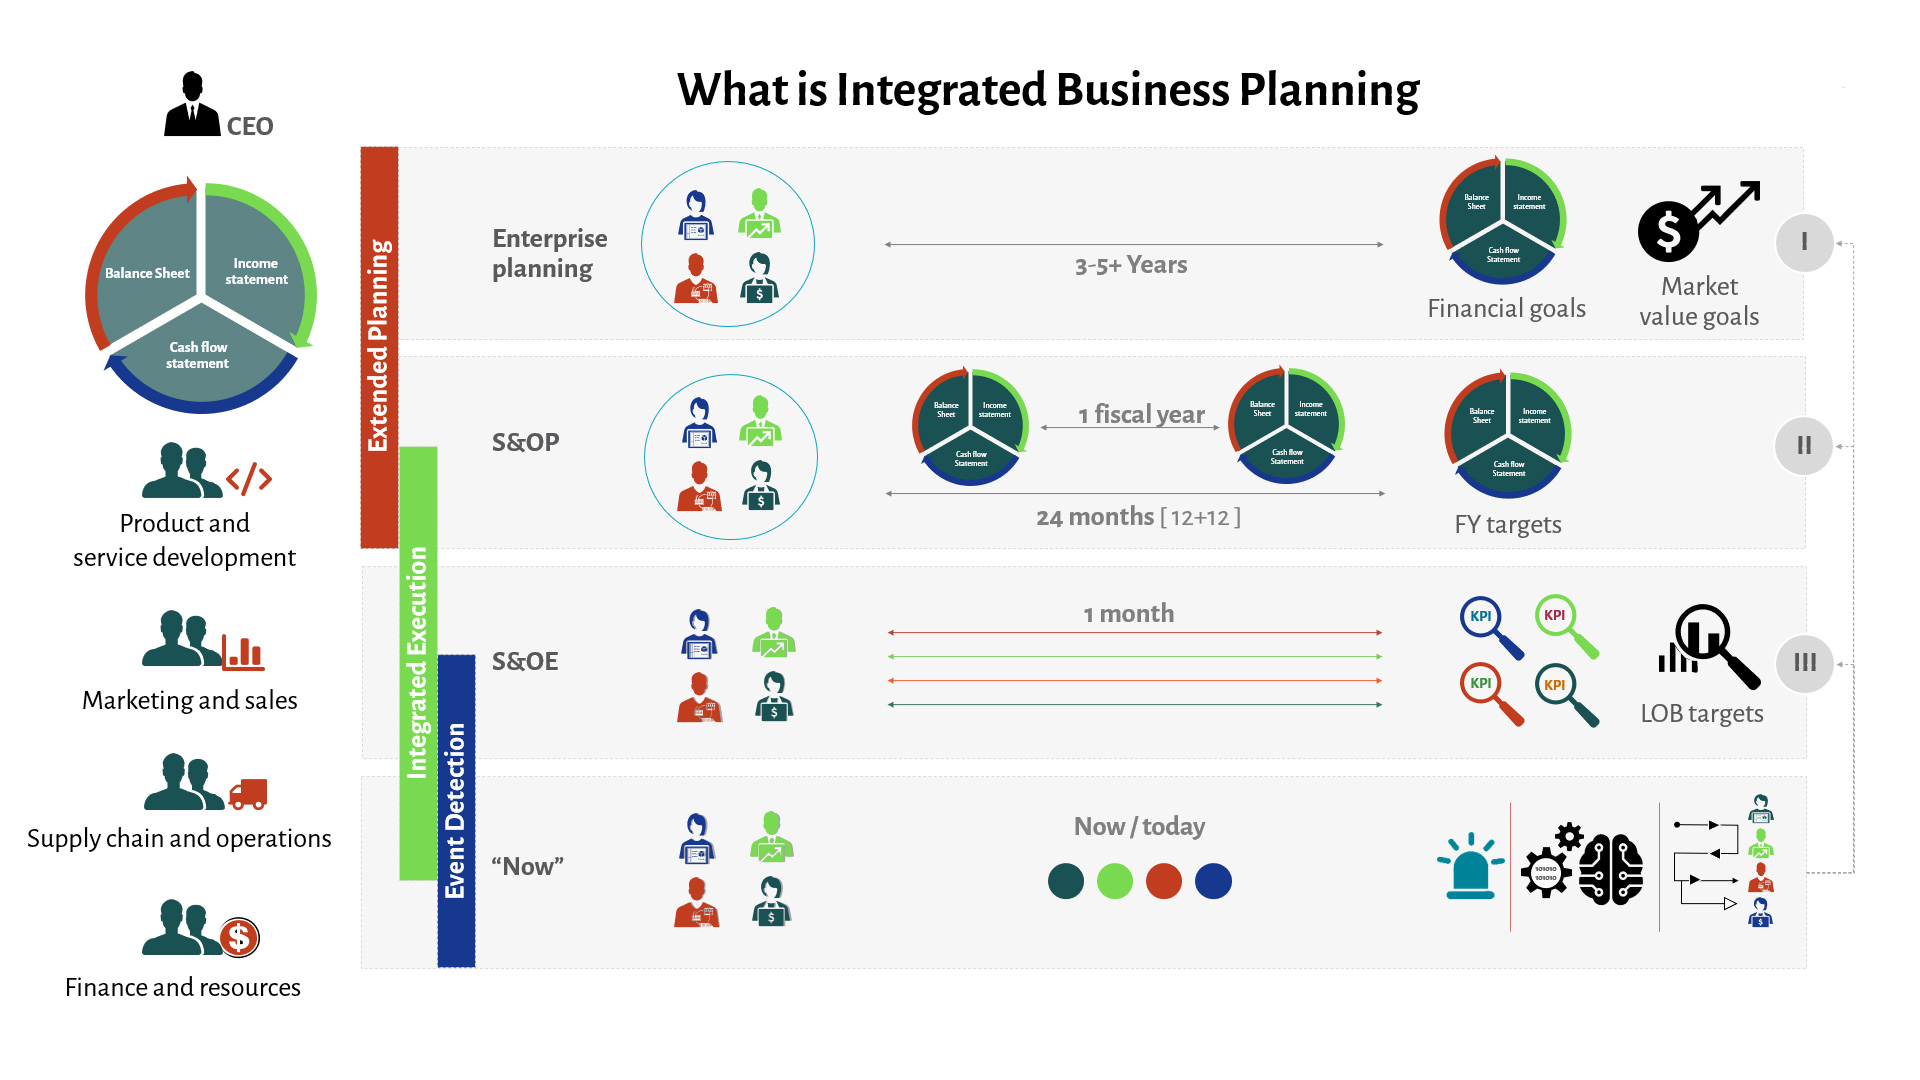 system in business planning